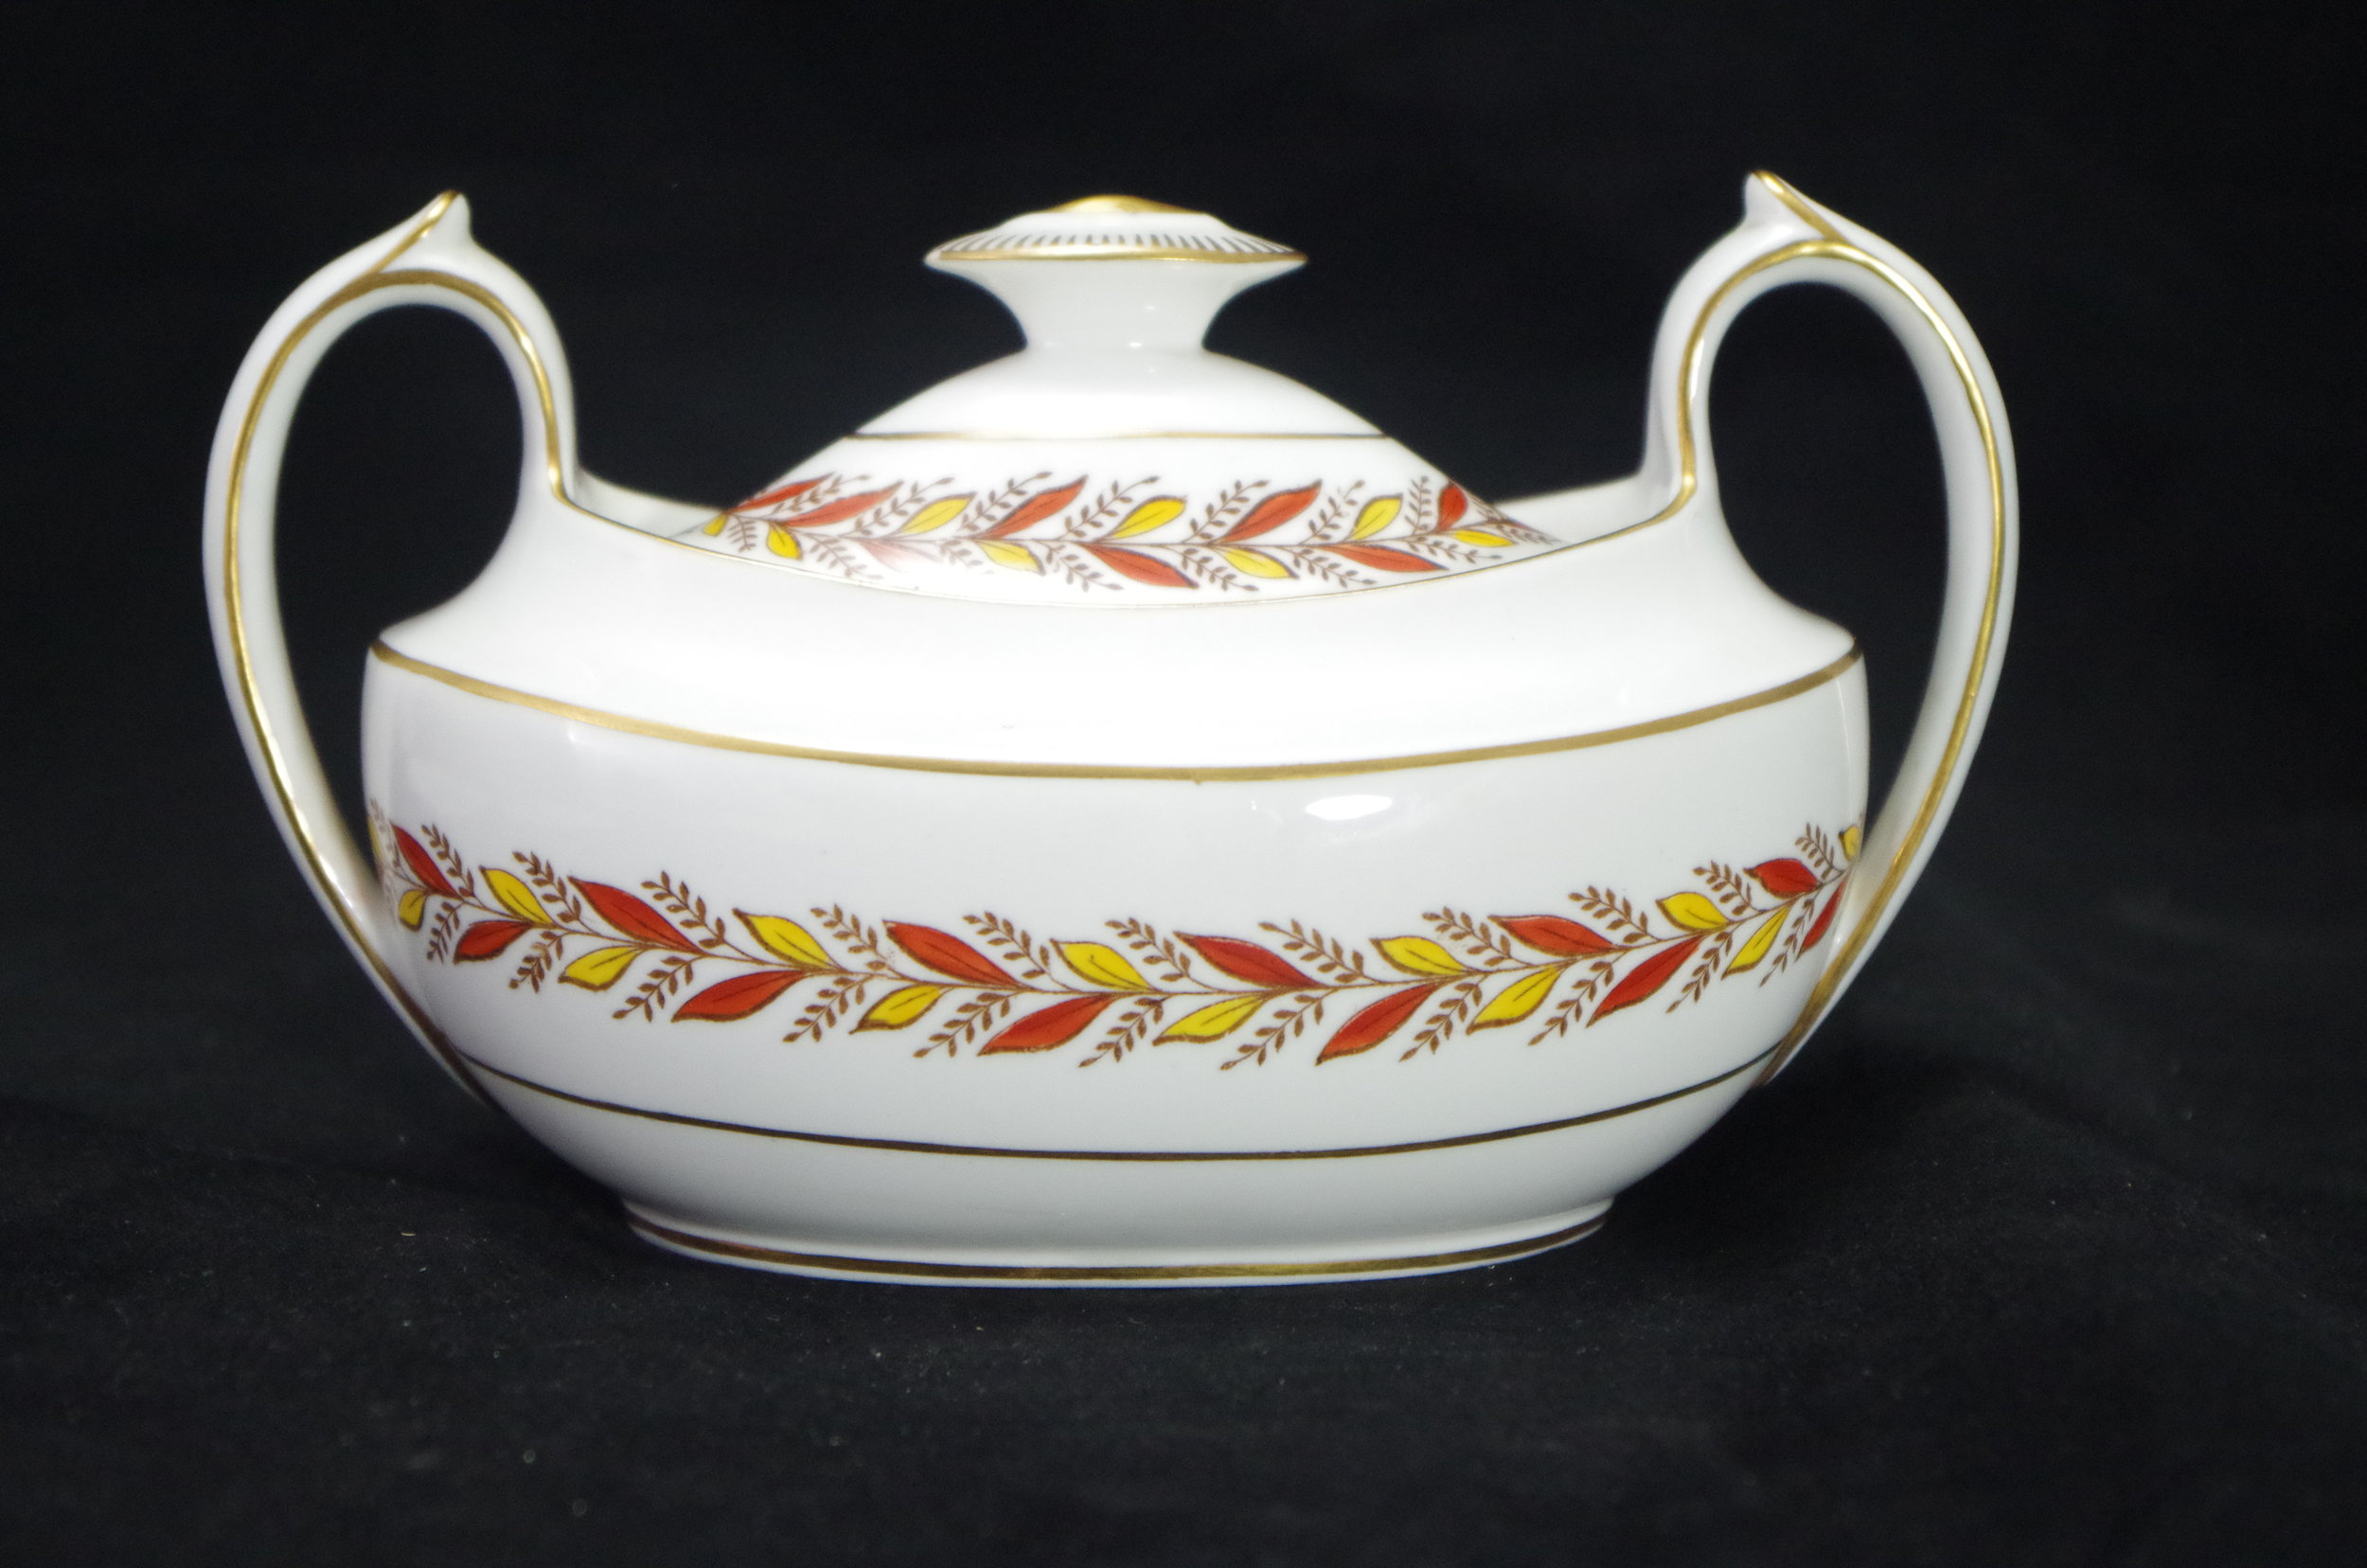 Royal Crown Derby ~ Accentuate Gold ~ Charnwood Small Tea Pot, Price  $185.00 in Tupelo, MS from Elizabeth Clair's